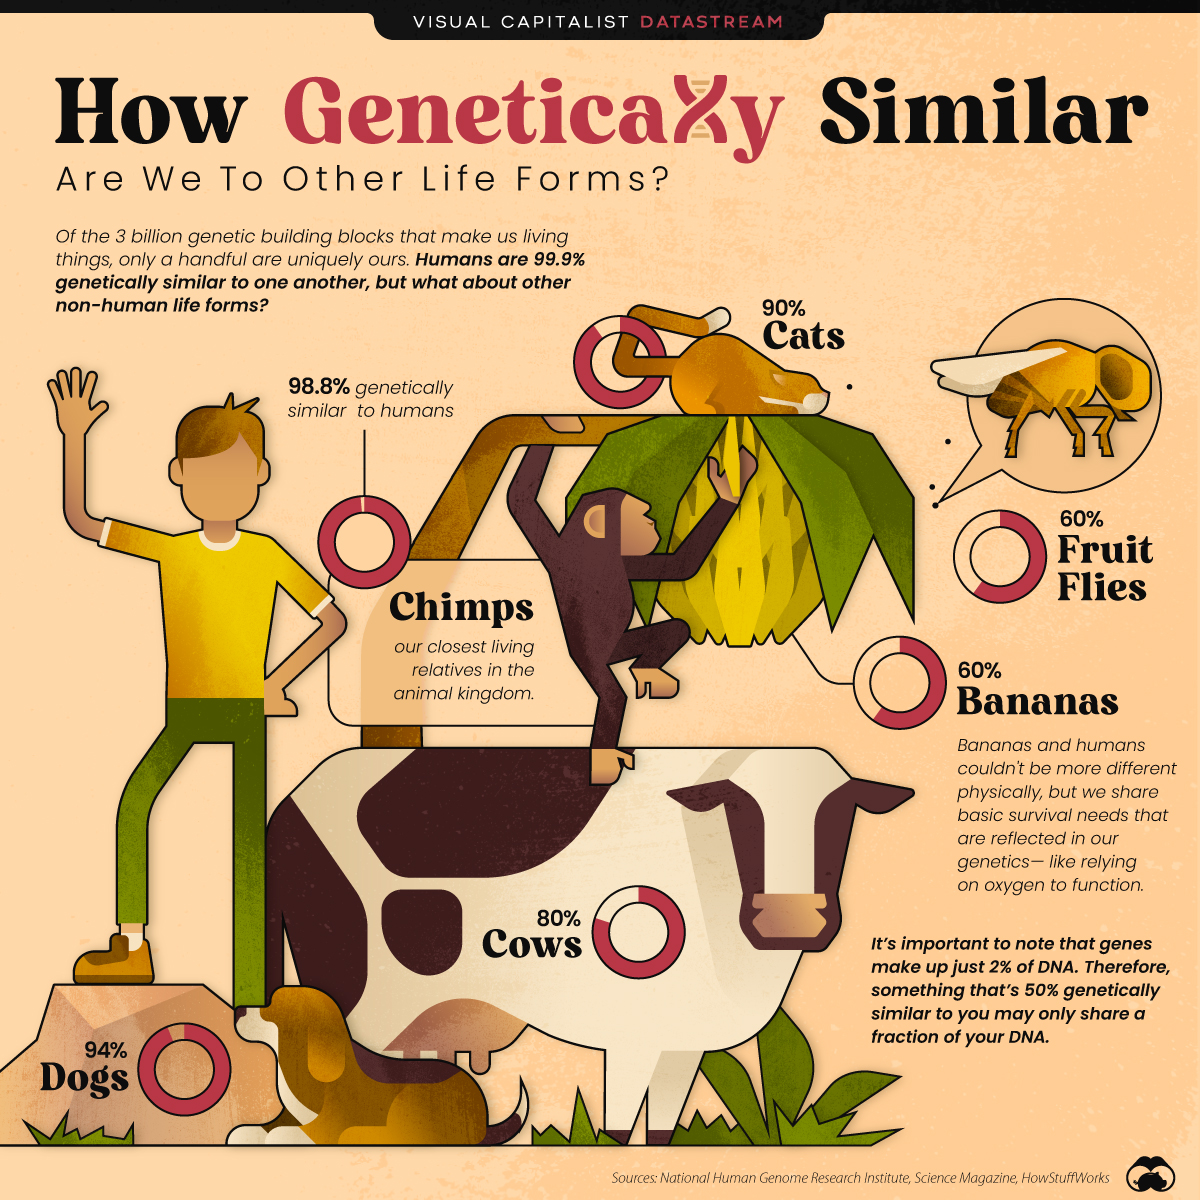 How similar are humans and animals genetically?